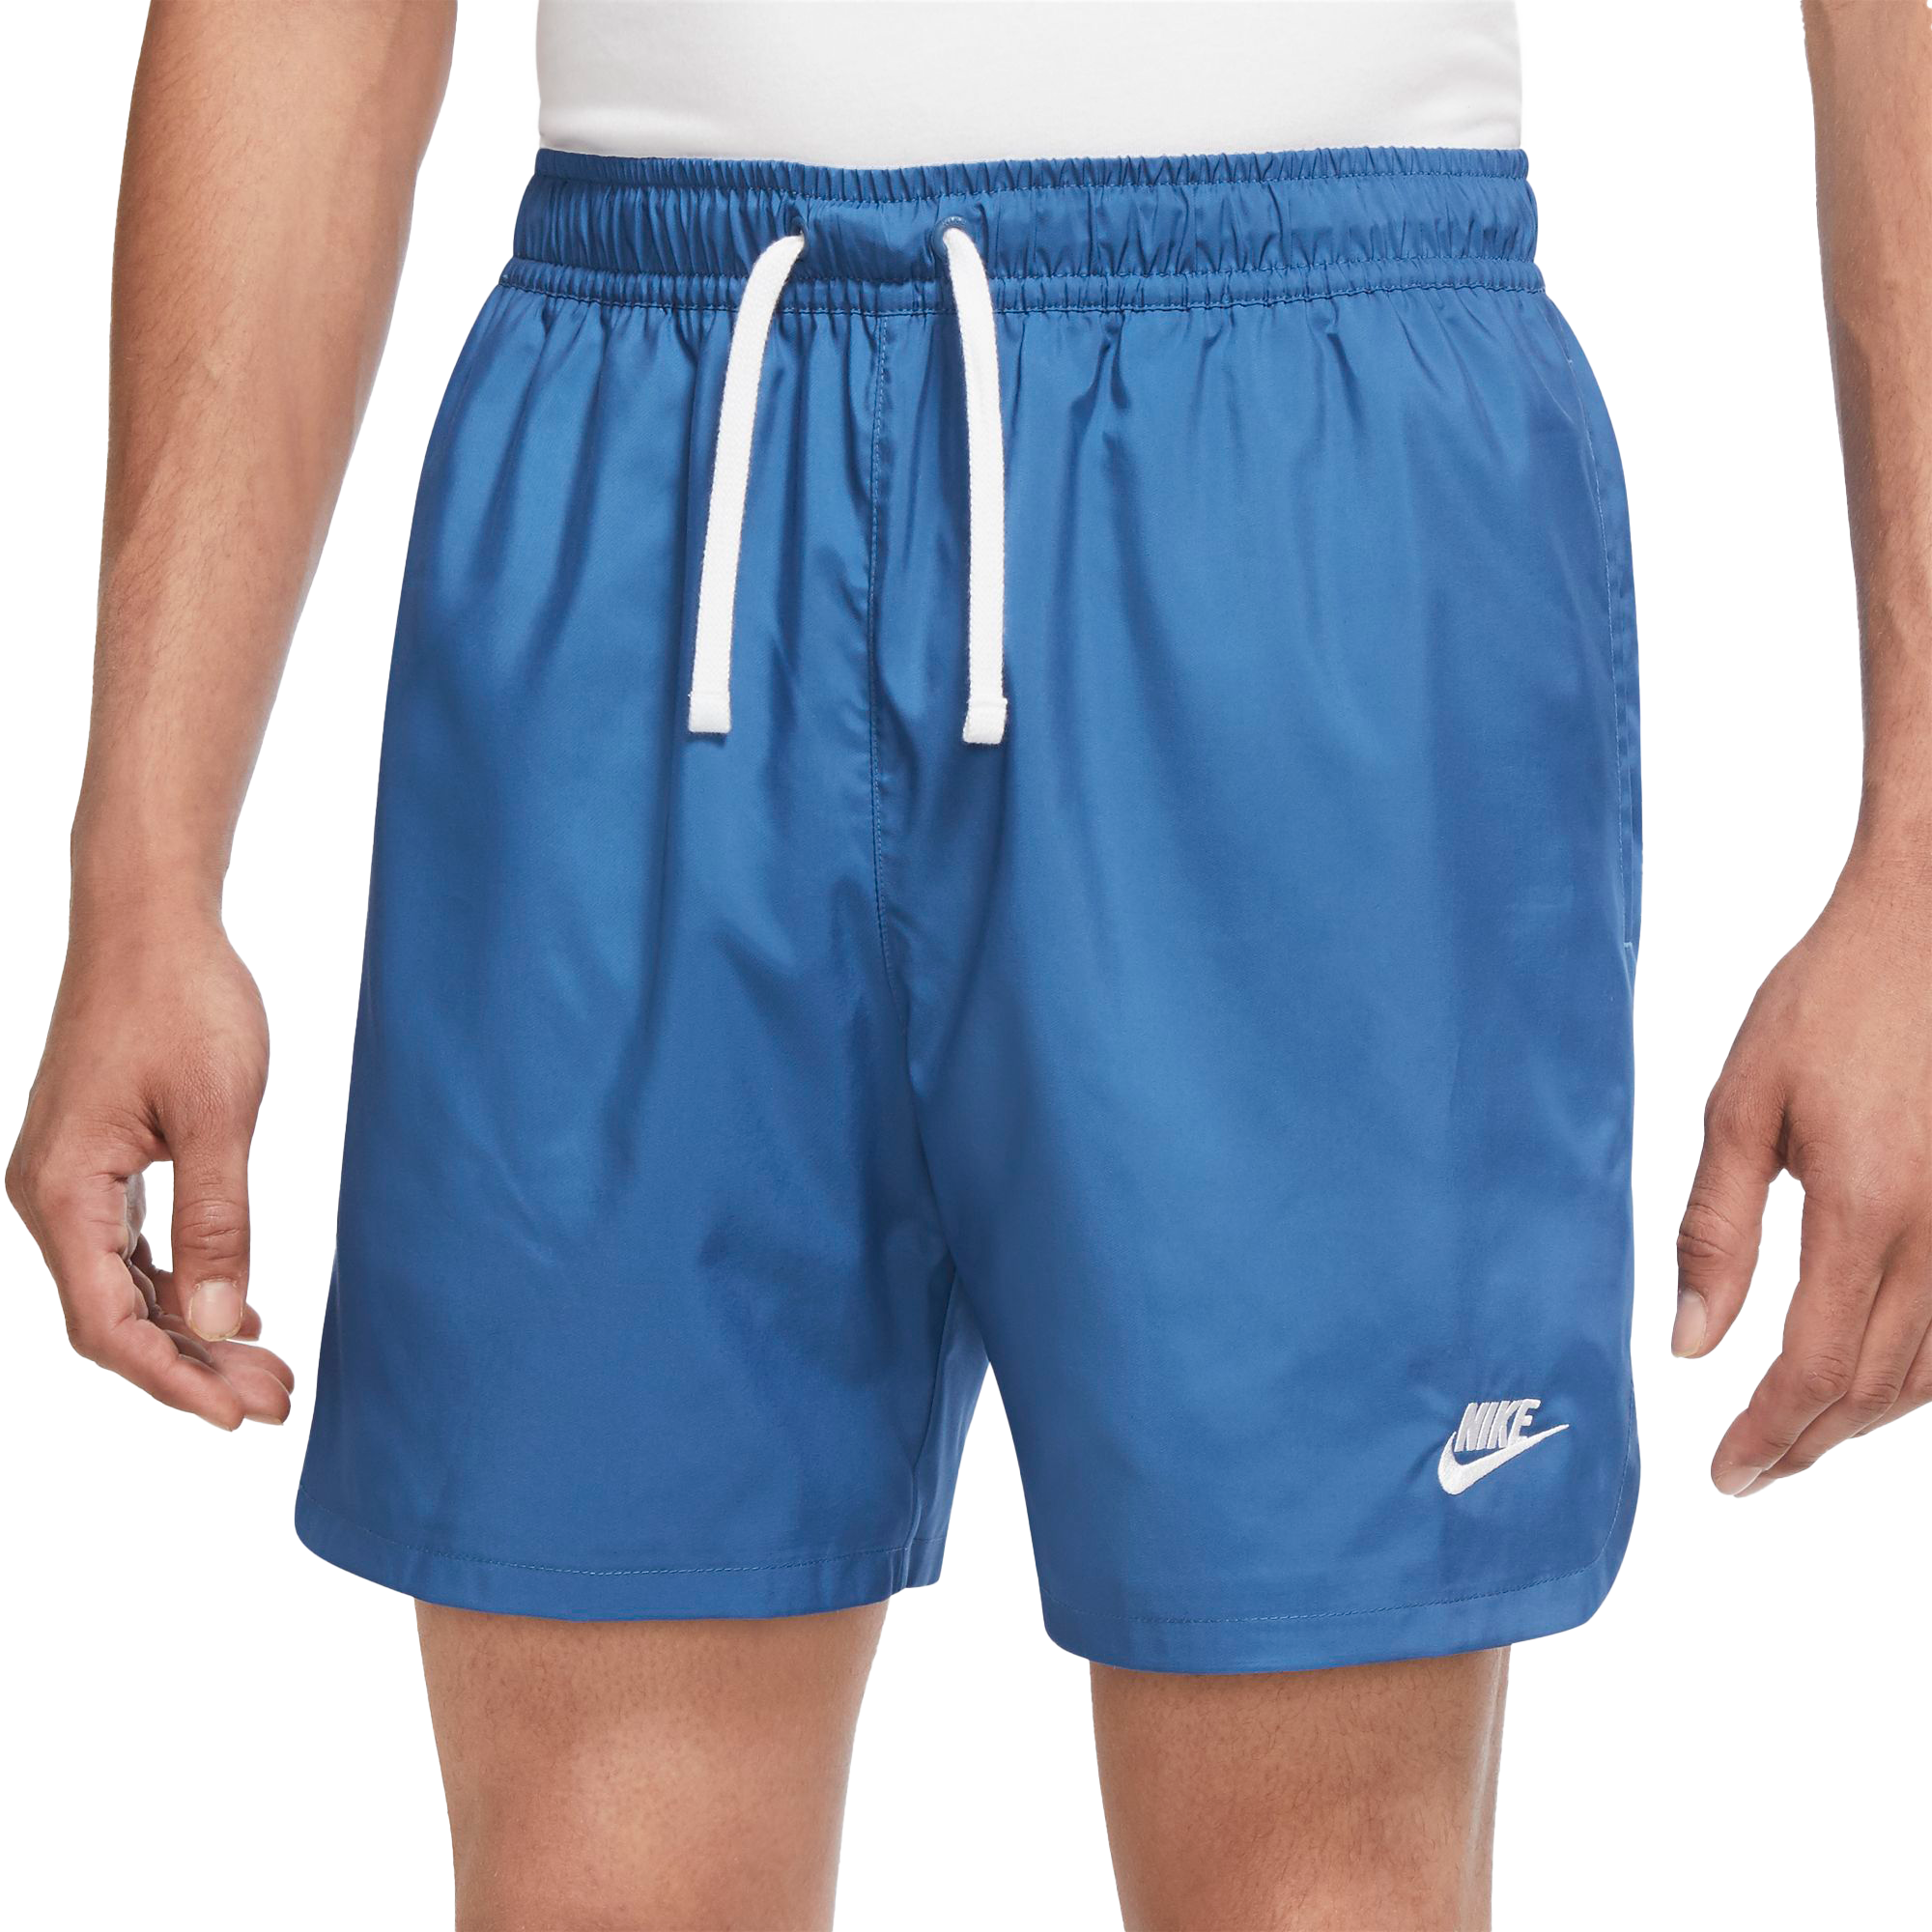 Nike 100% Polyester Blue Athletic Shorts Size M - 52% off